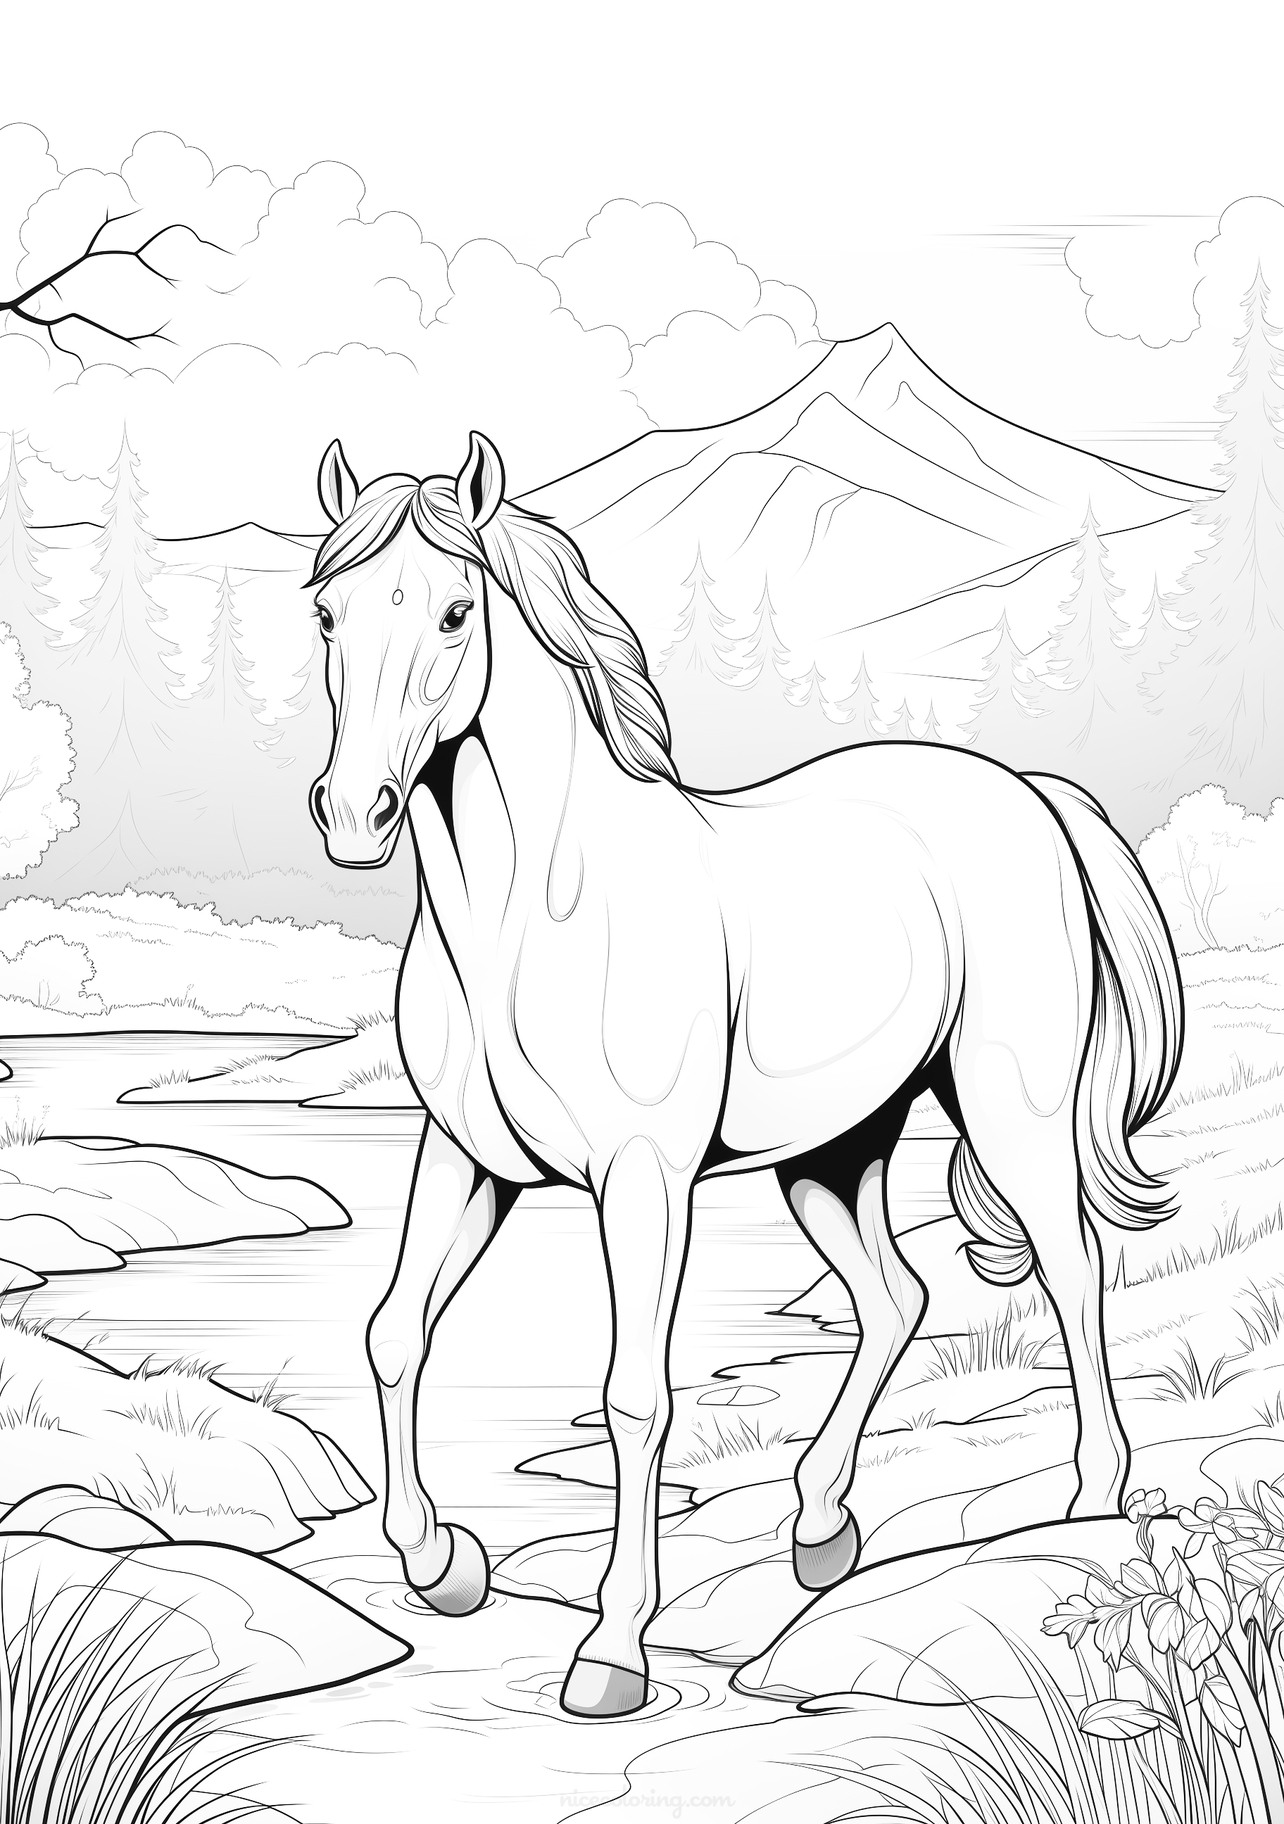 Majestic horse ready to color with a nature scenery backdrop